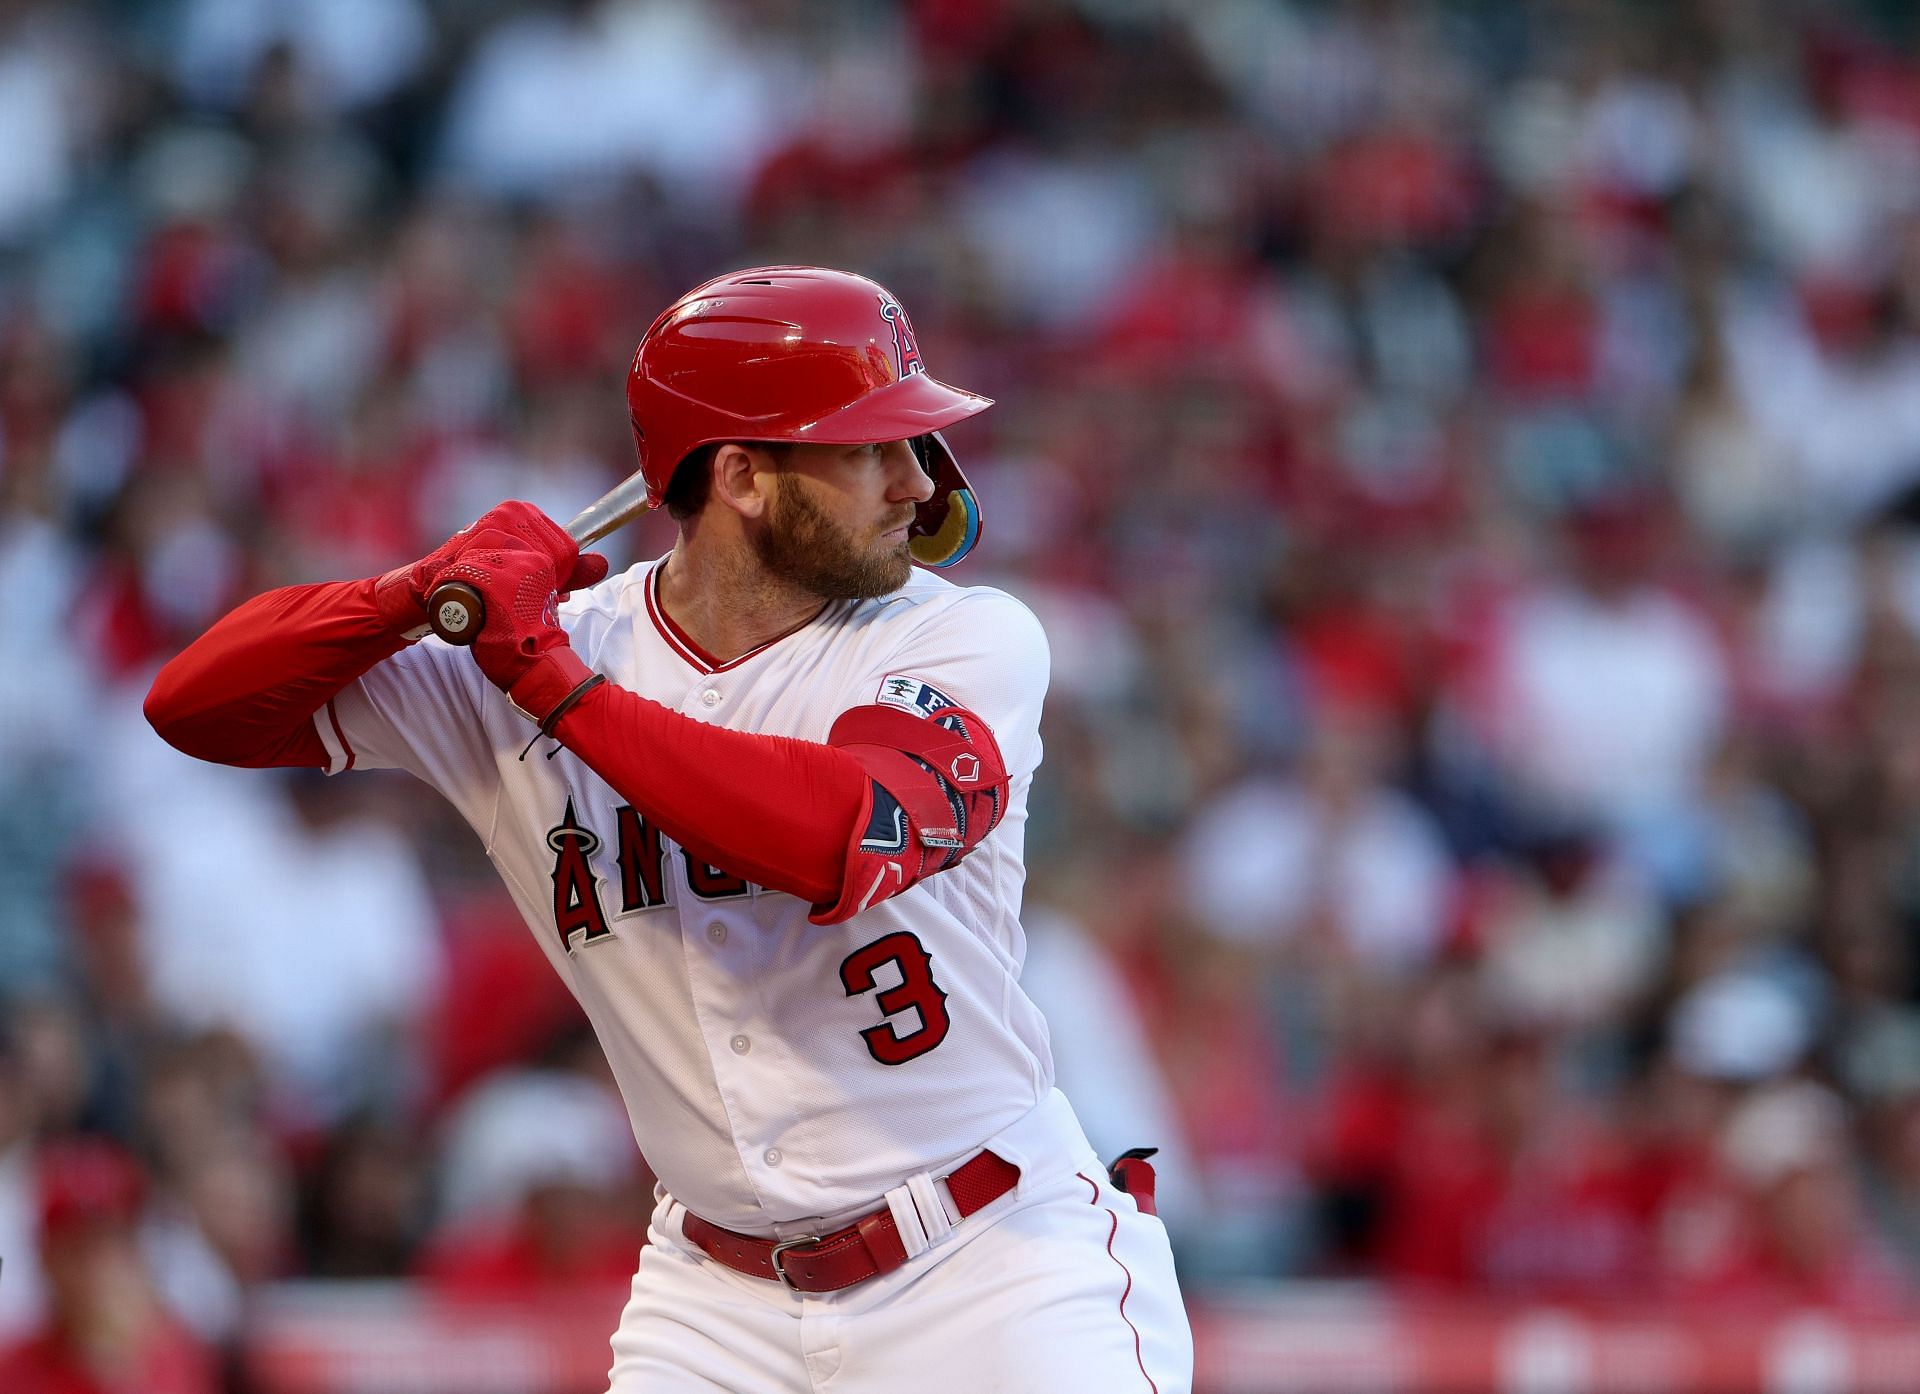 Angels News: Taylor Ward 'Feeling Stronger' Than Any Point After Injury -  Angels Nation